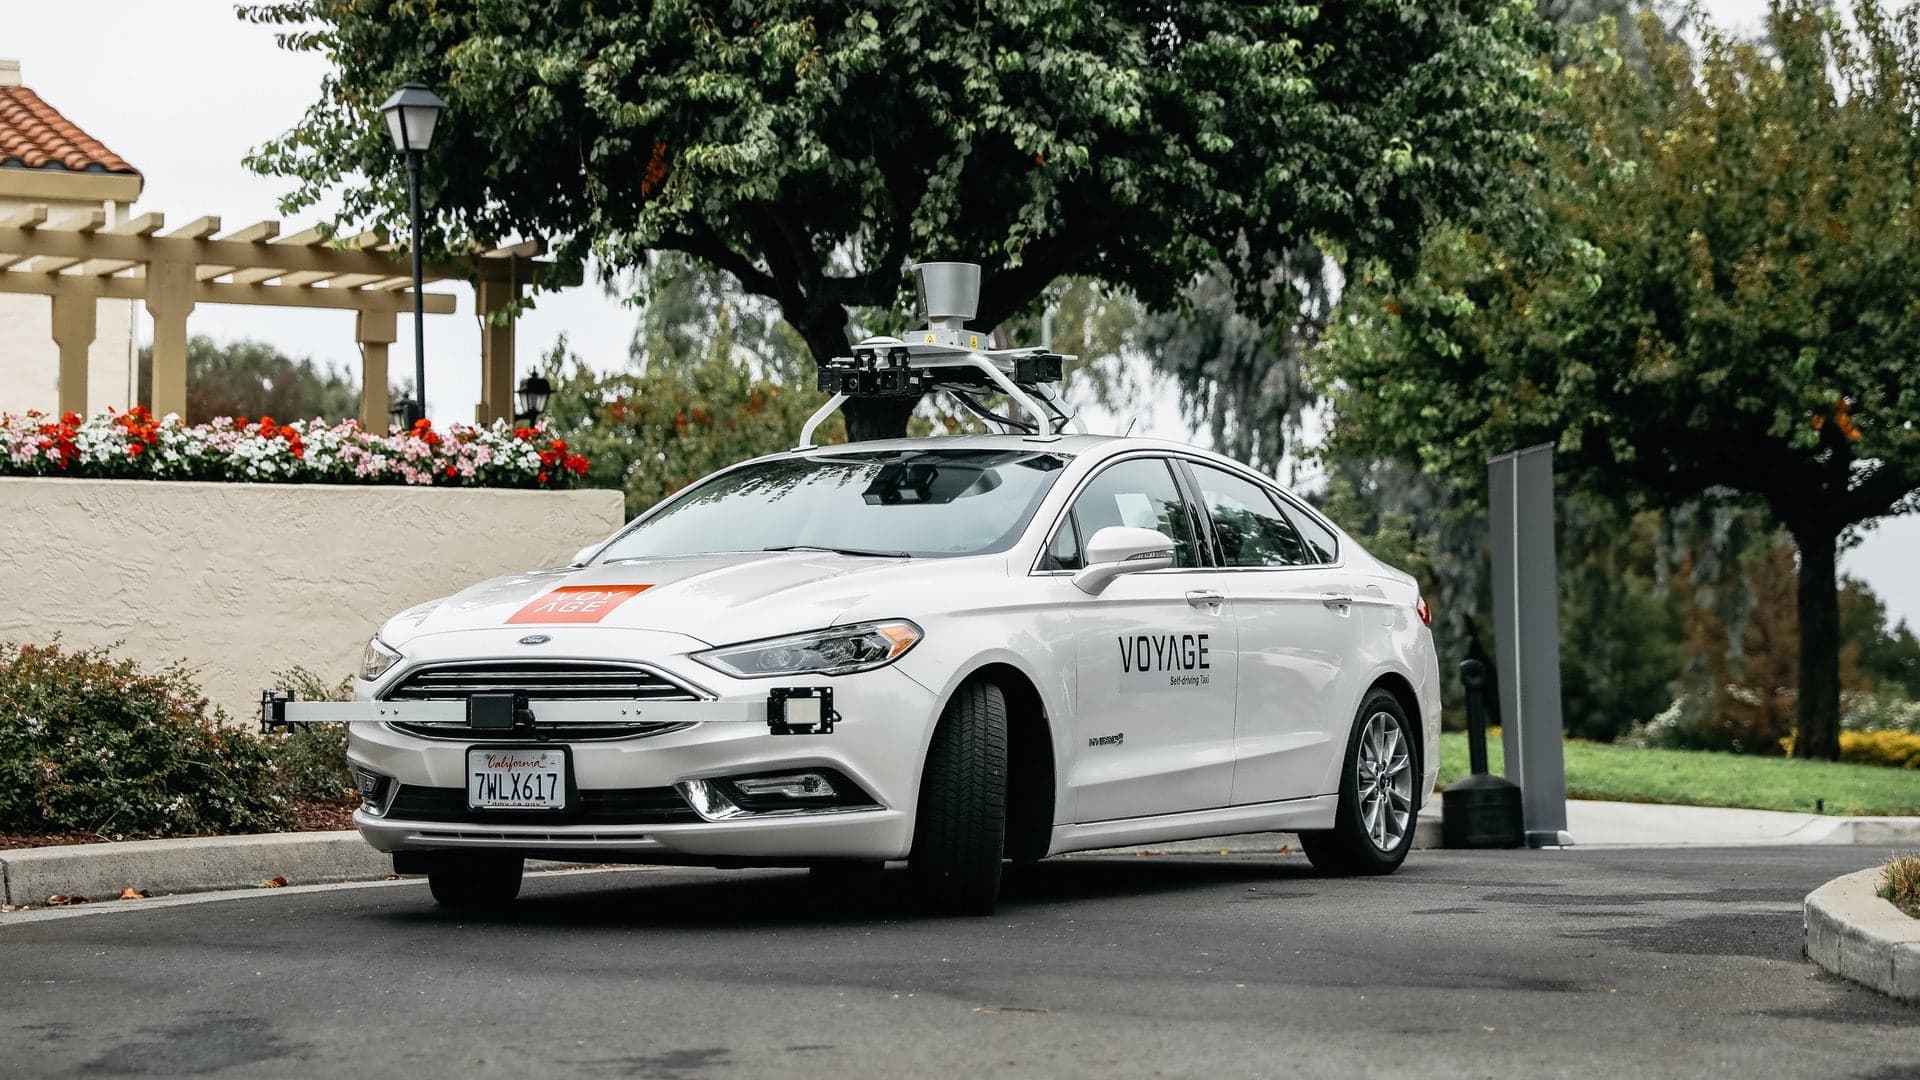 Voyage Tests Self-Driving Cars in Retirement Communities